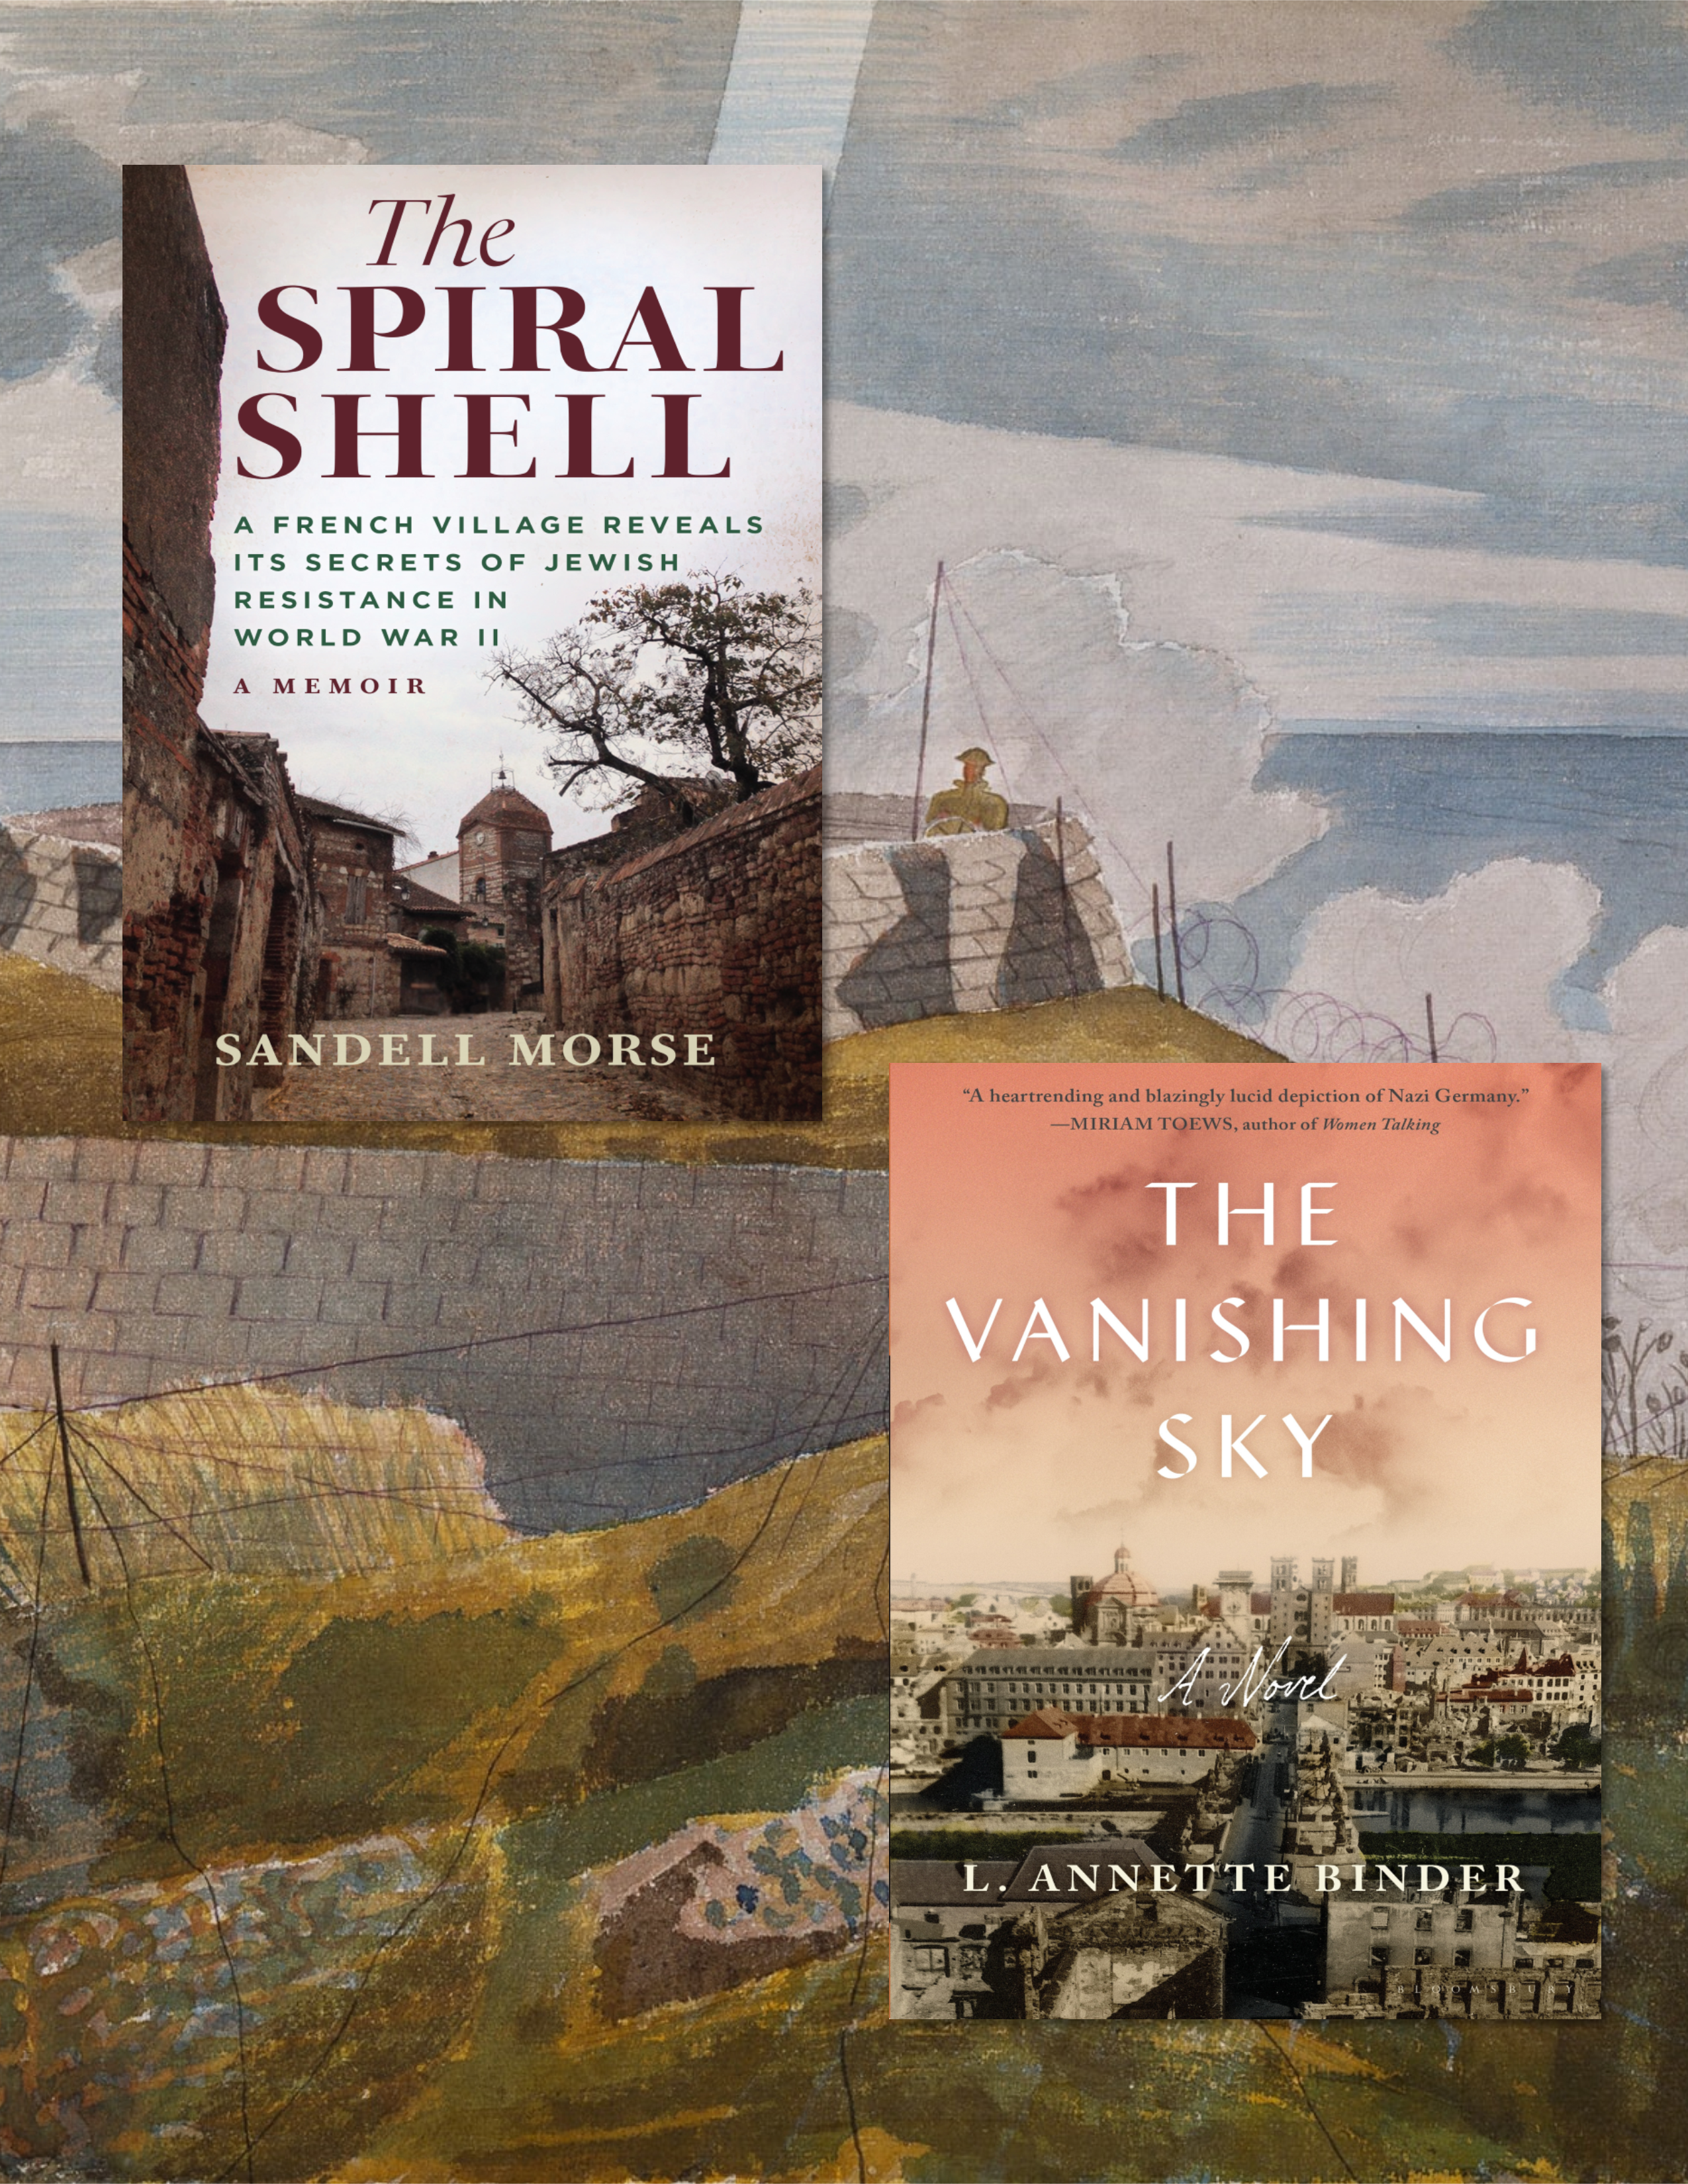 The Vanishing Sky & The Spiral Shell Book Covers